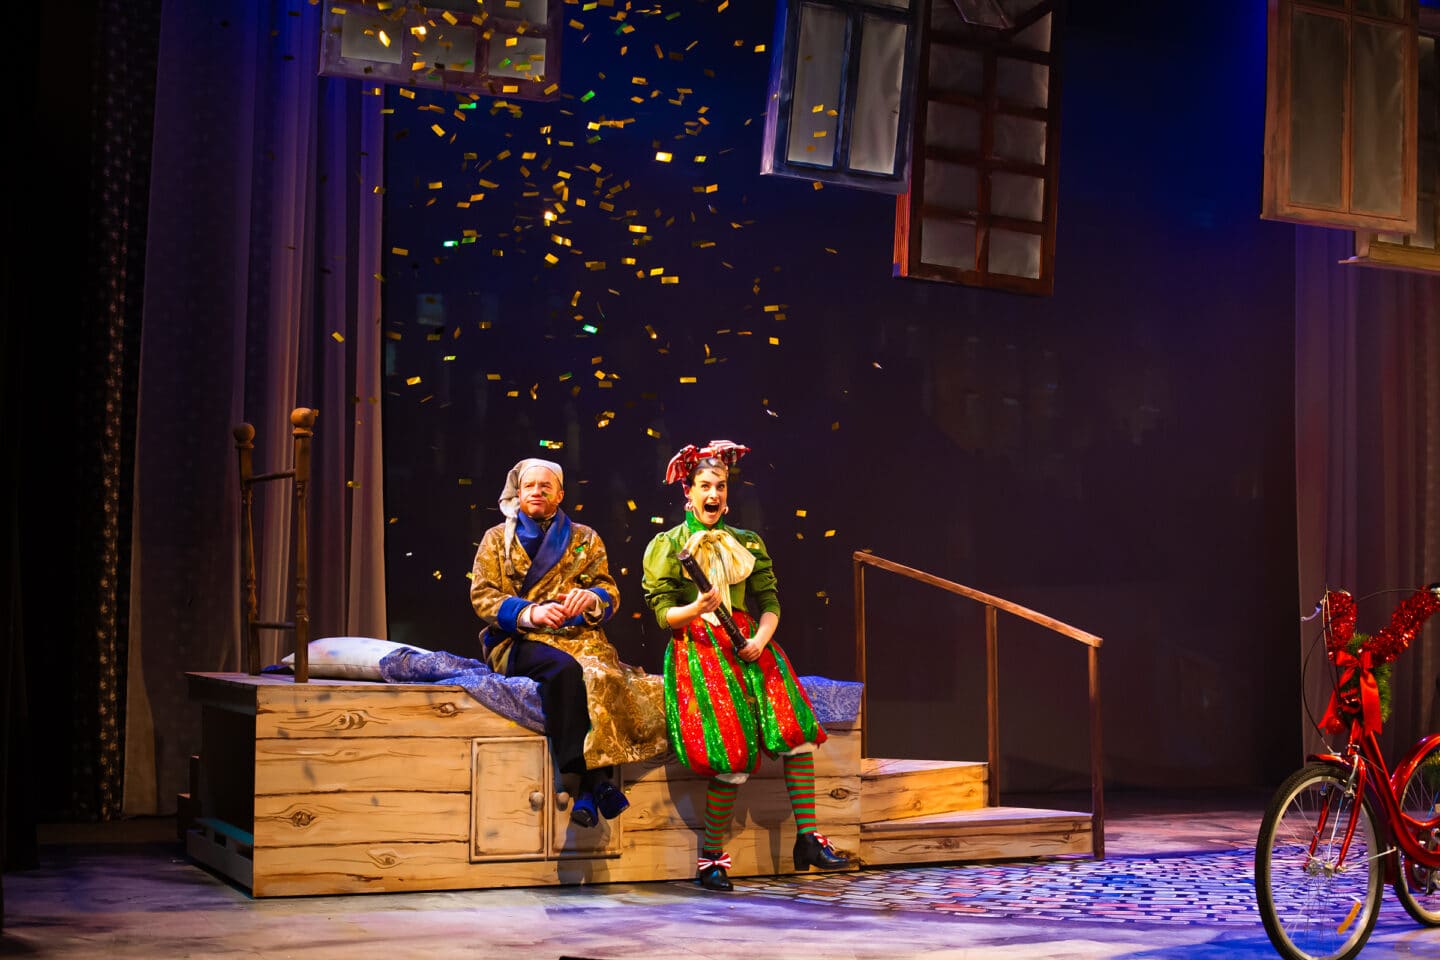 A Christmas Carol at The Dukes Theatre